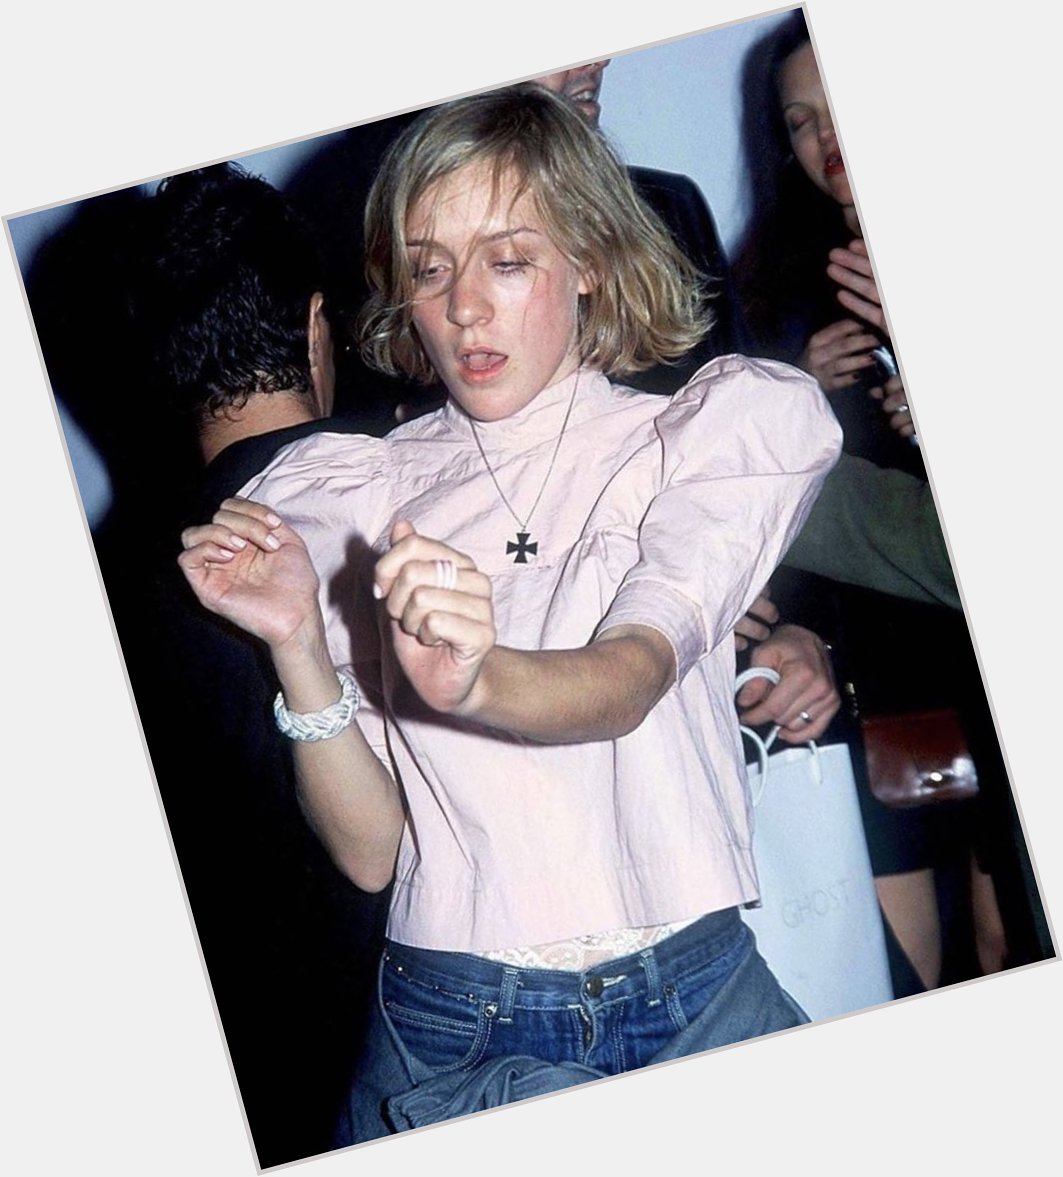 I want the messy energy that chloë sevigny has,, happy birthday queen 